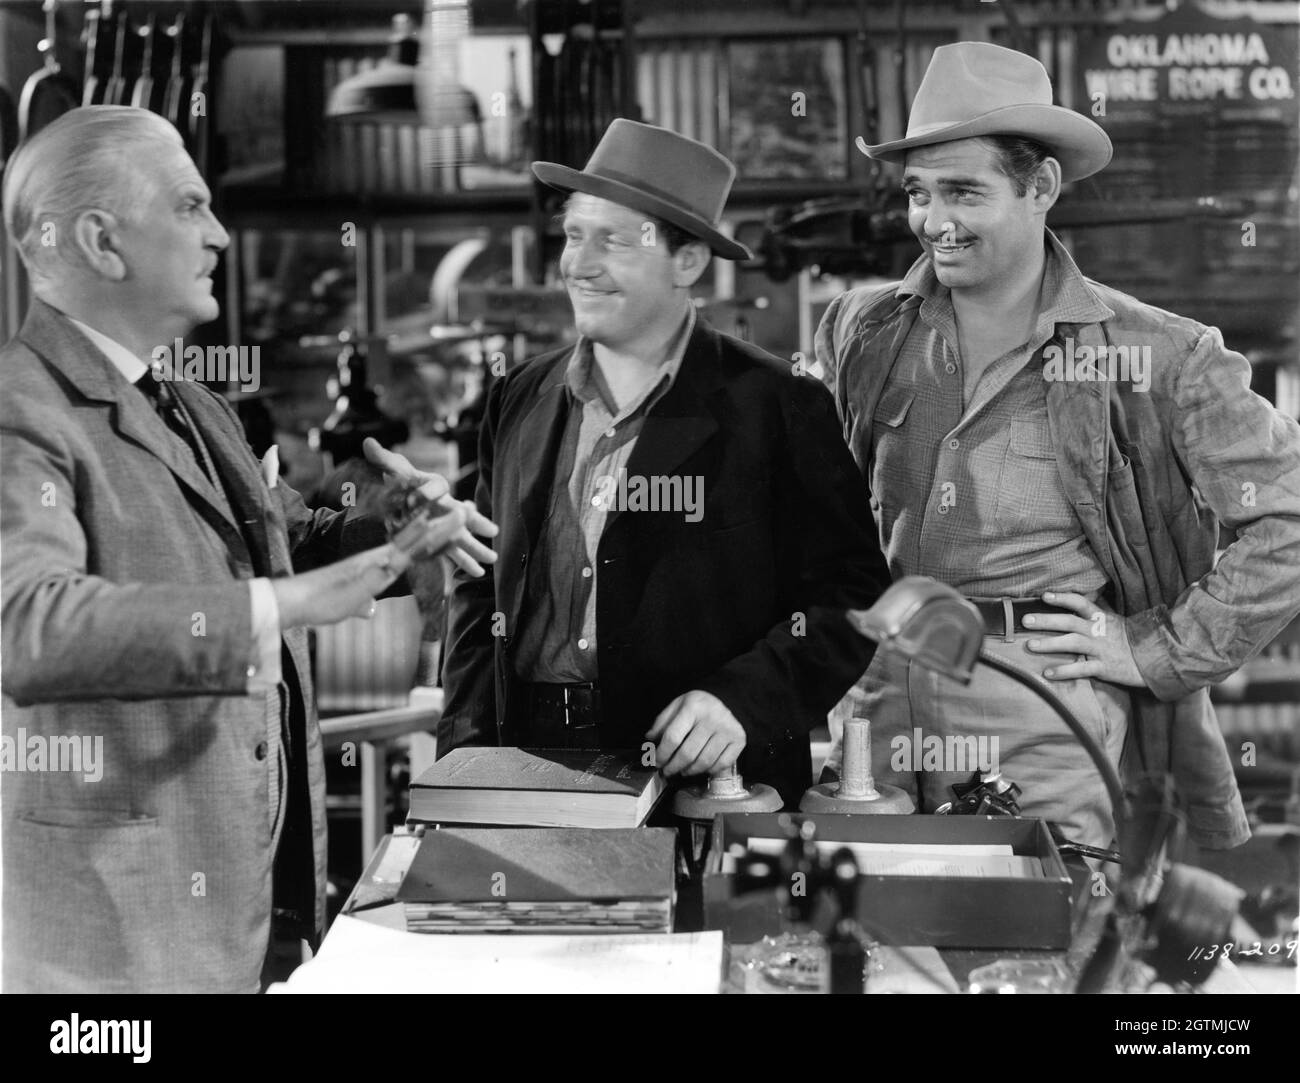 FRANK MORGAN SPENCER TRACY and CLARK GABLE in BOOM TOWN 1940 director JACK CONWAY screenplay John Lee Mahin based on a story by James Edward Grant gowns Gilbert Adrian music Franz Waxman Metro Goldwyn Mayer Stock Photo